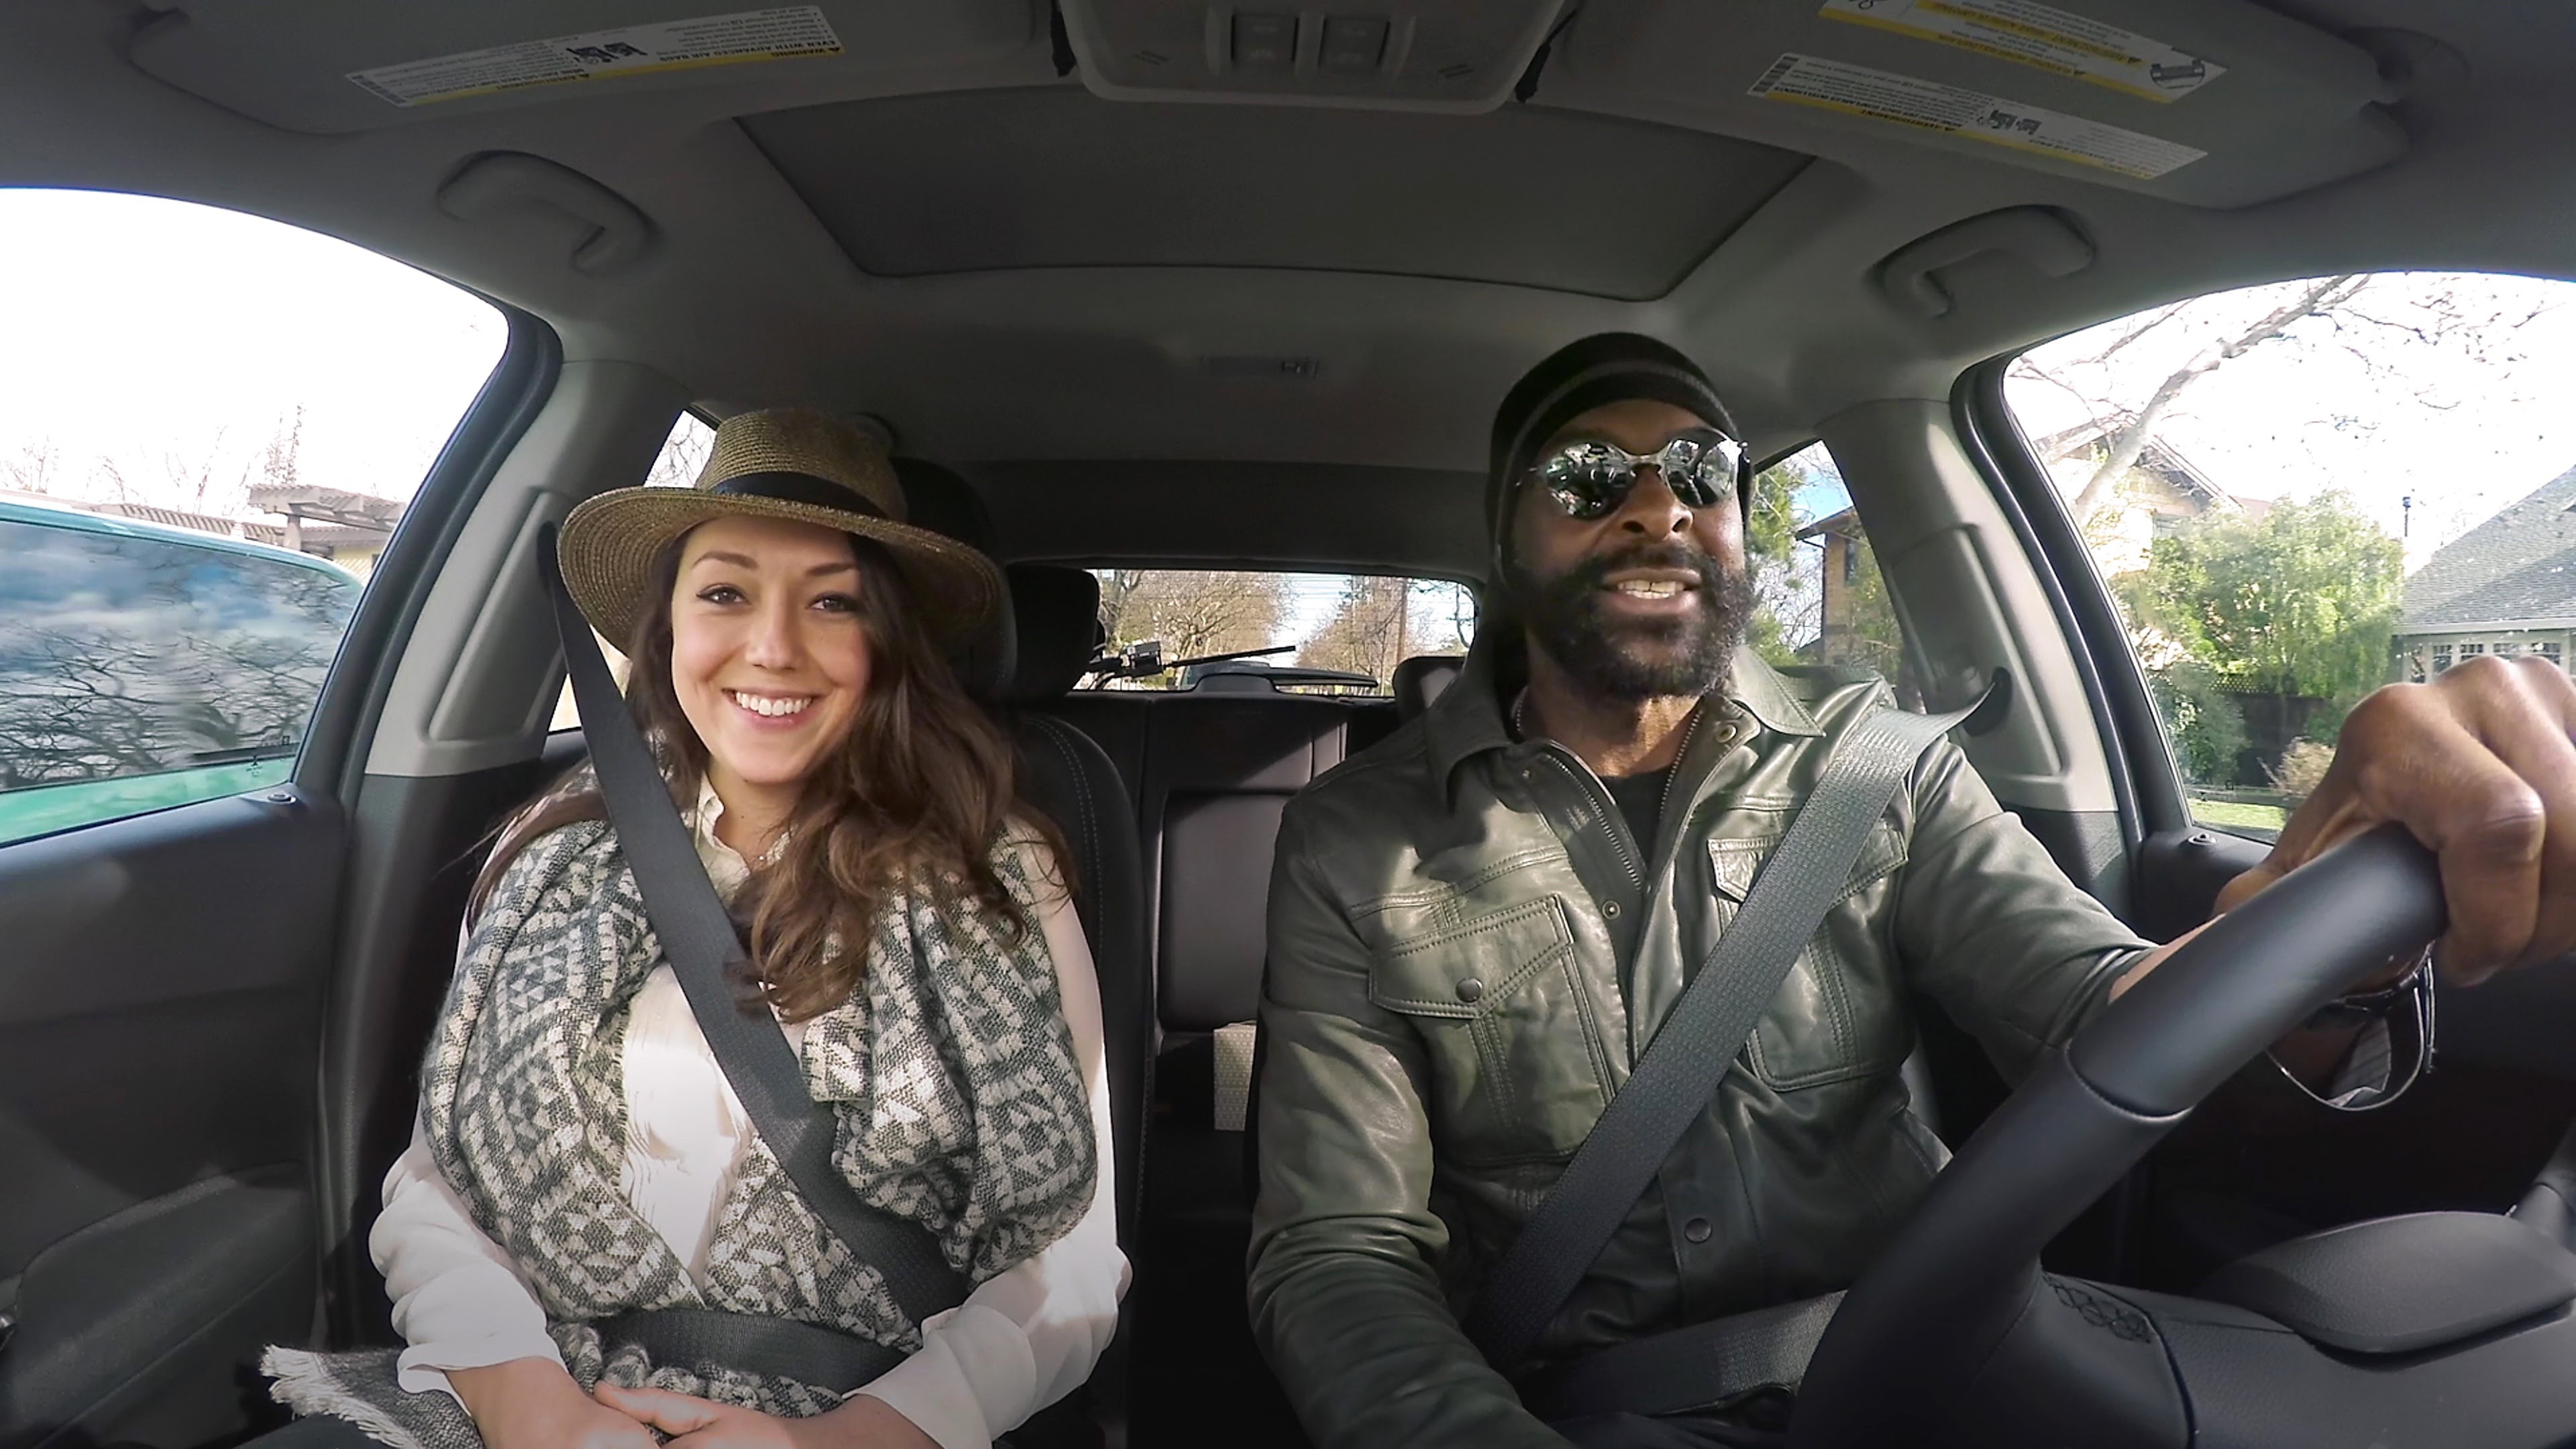 Jerry Rice goes undercover as a Lyft driver & passengers don't recognize him